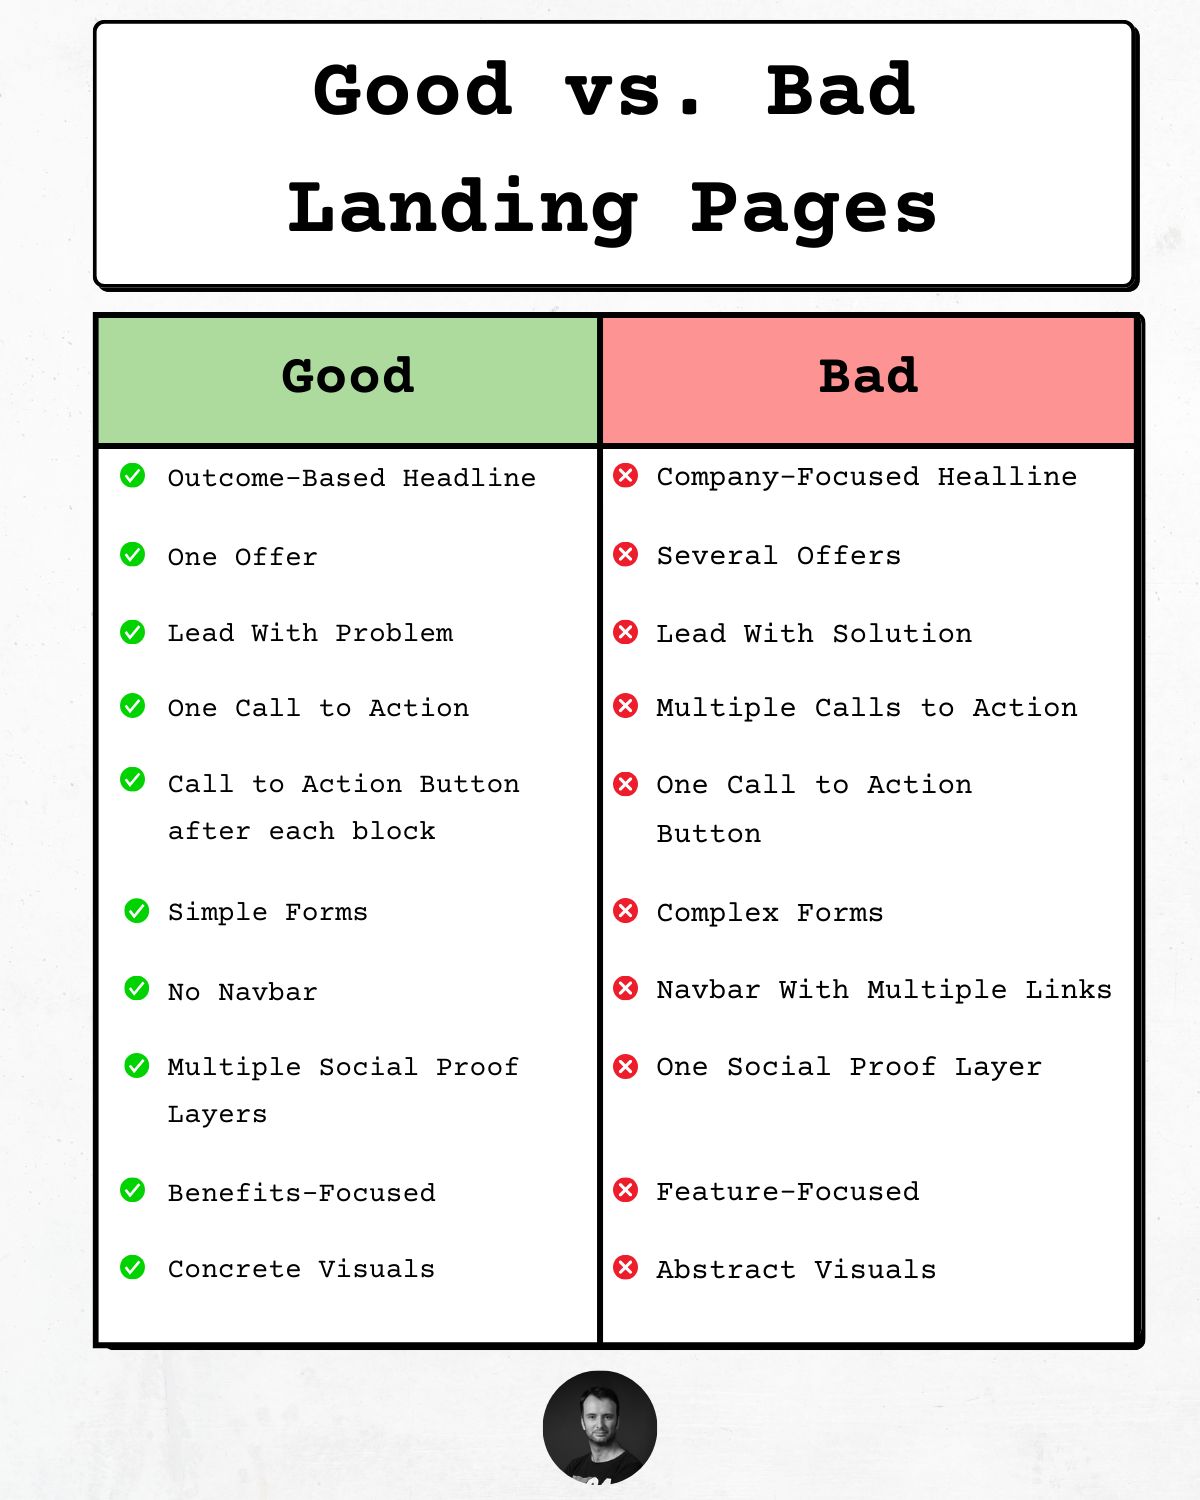 The 10 differences between good and bad landing pages (2 minute read)